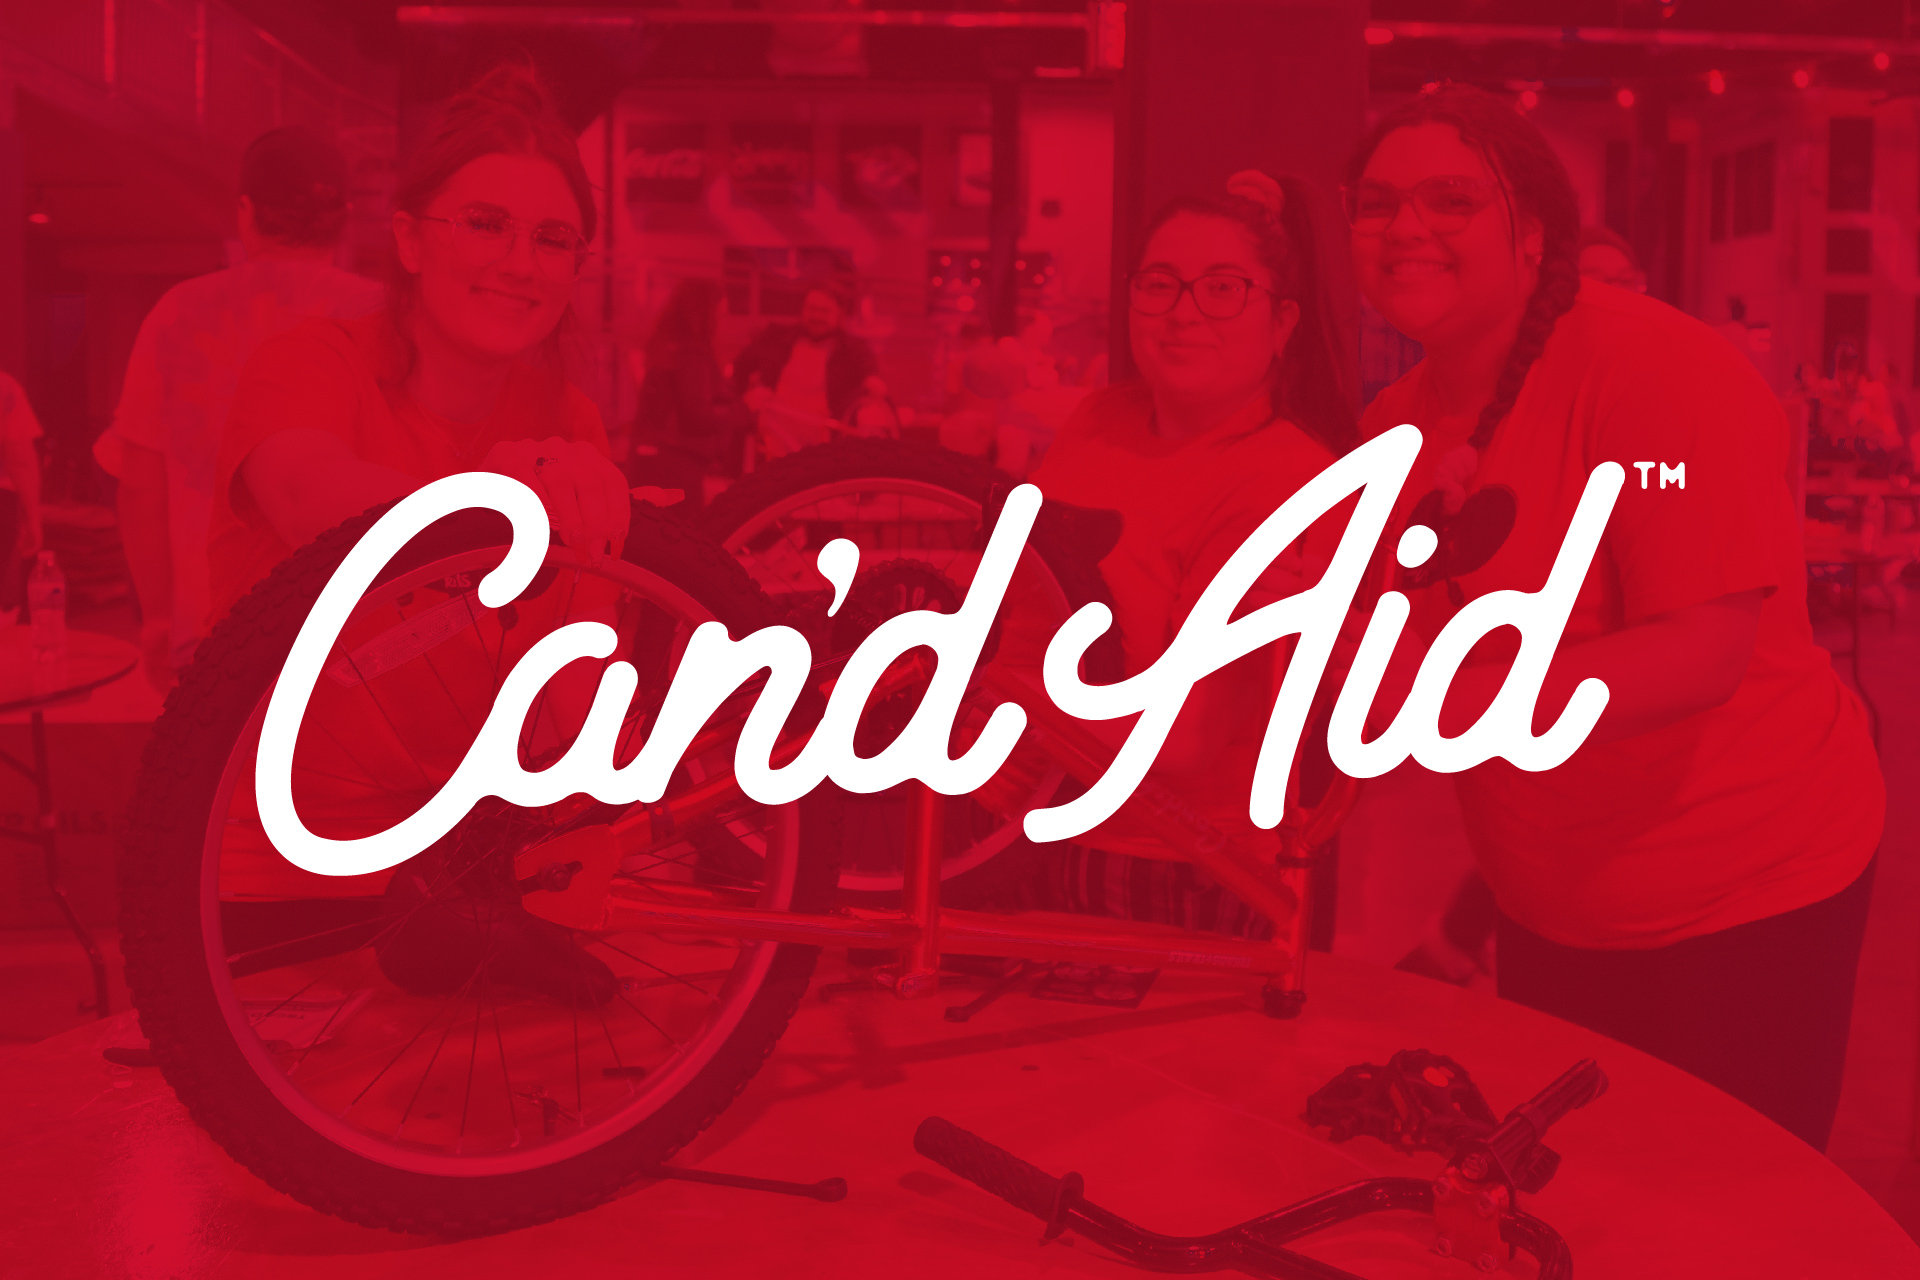 Journeys is a proud partner of Can'd Aid, a Colorado-based organization whose mission is to rally volunteers from all walks of life to build thriving communities.